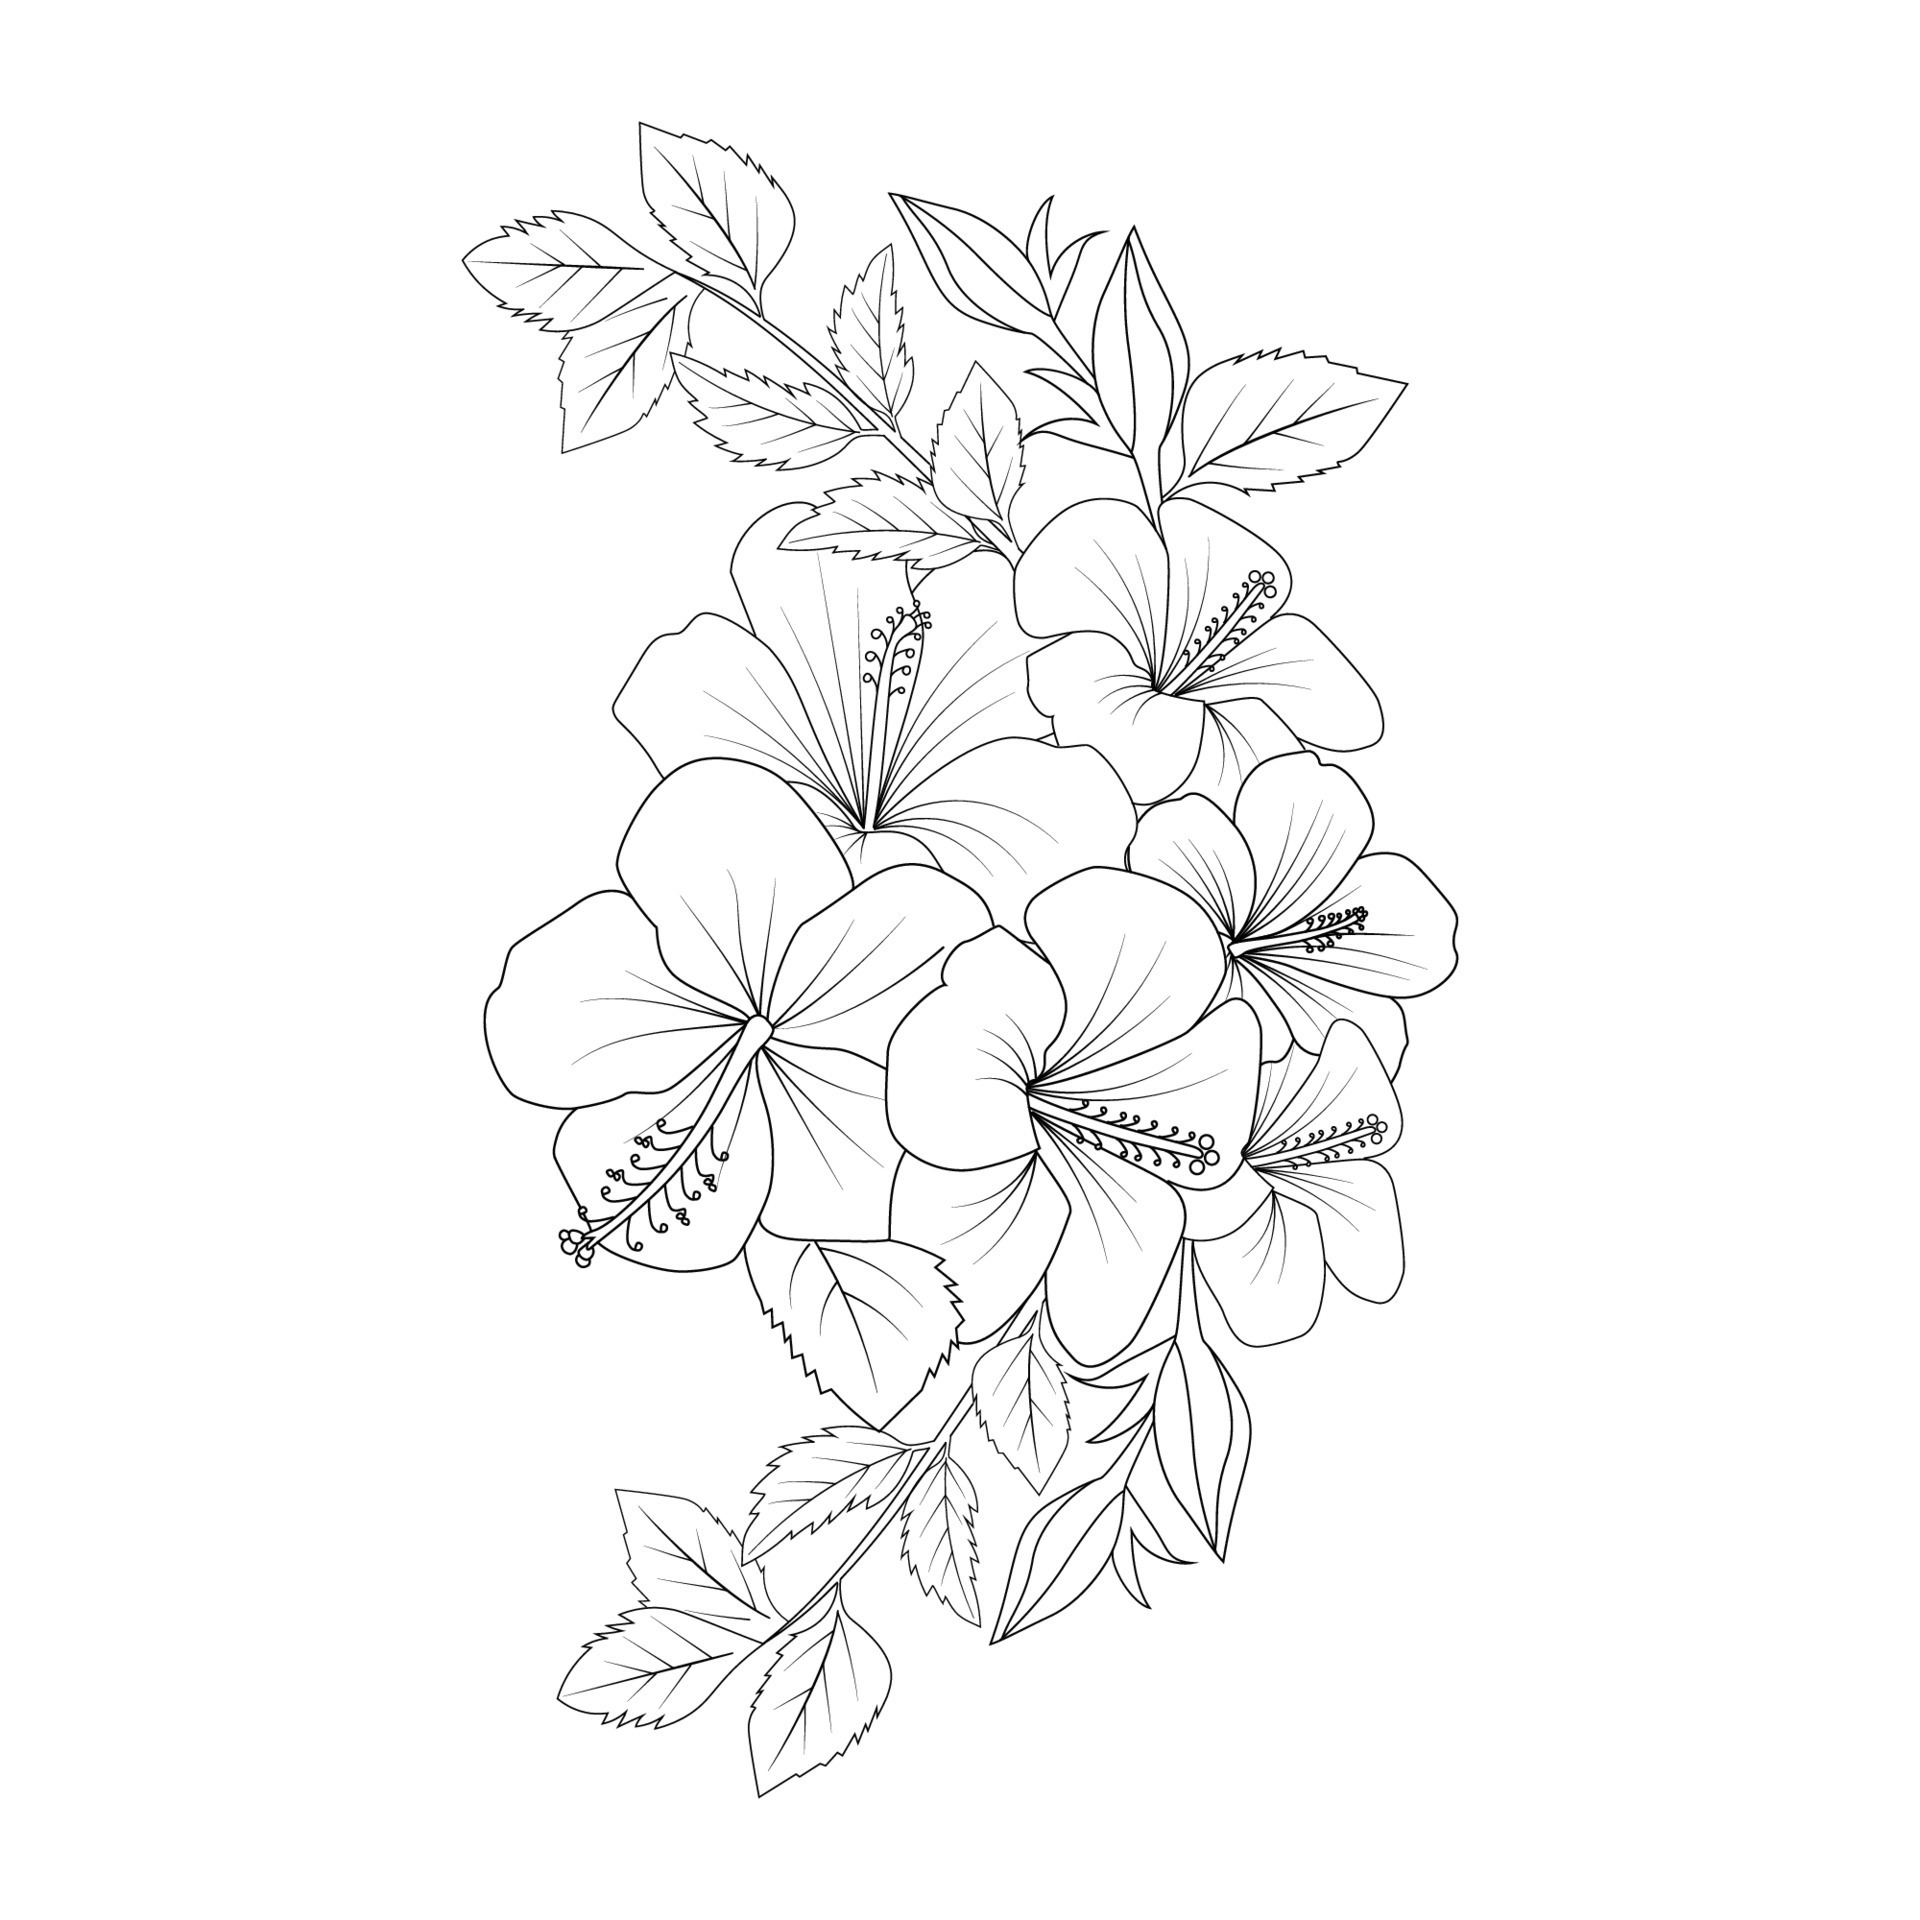 153097 Hawaii Flowers Drawing Images Stock Photos  Vectors  Shutterstock